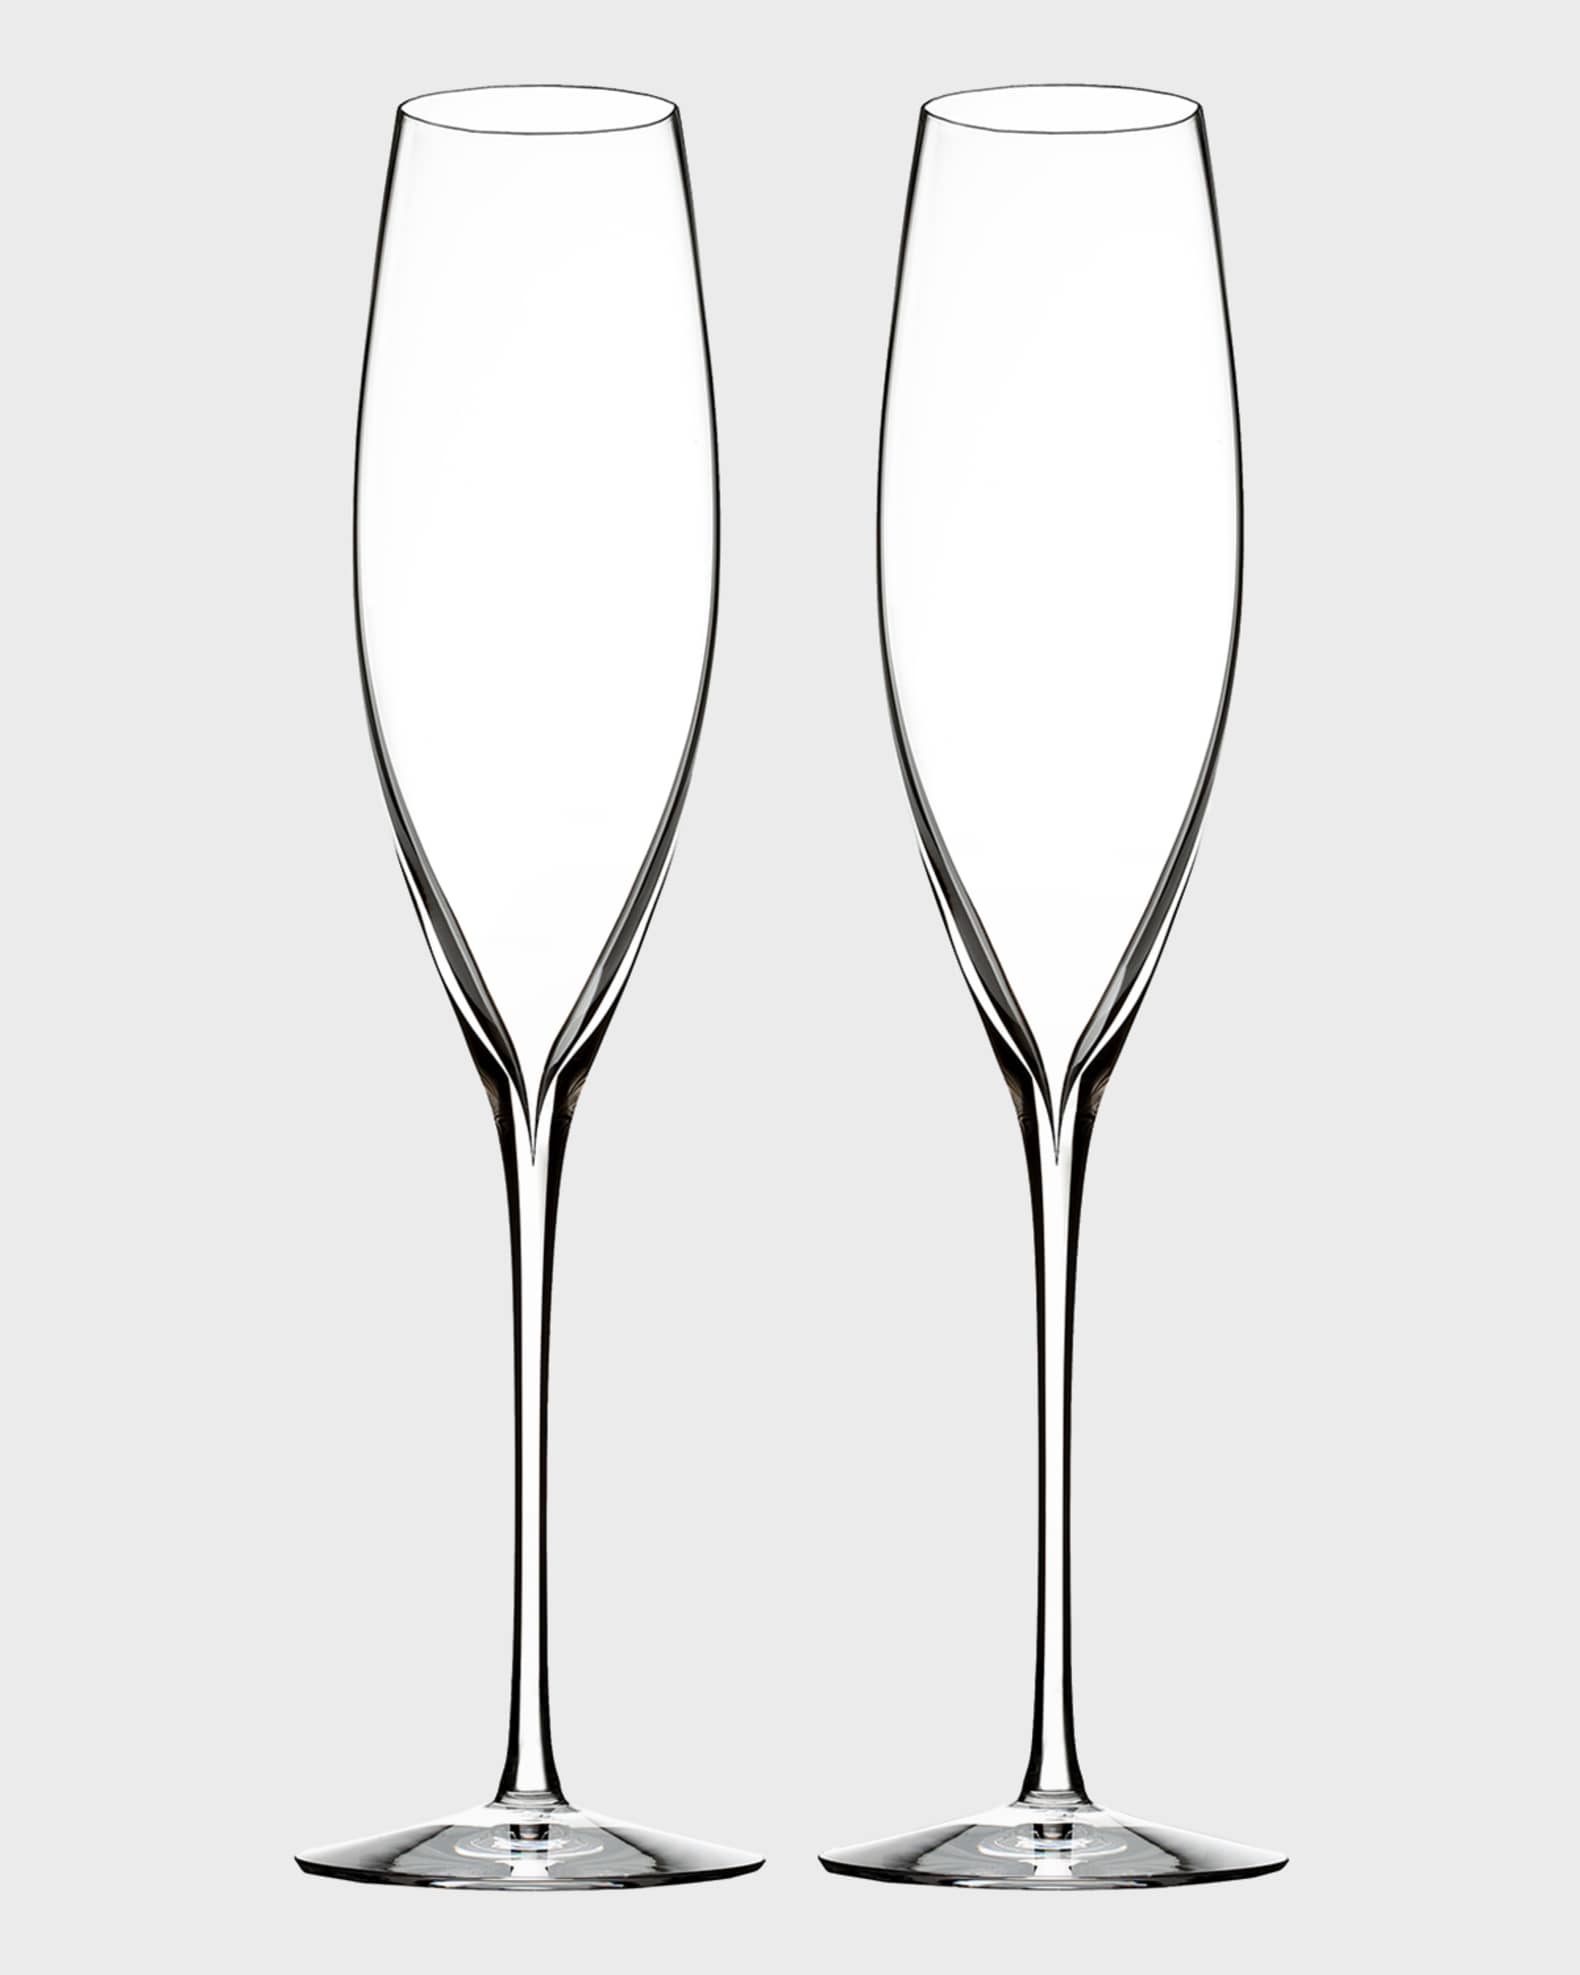 Gala Crystal Champagne Flute by World Market